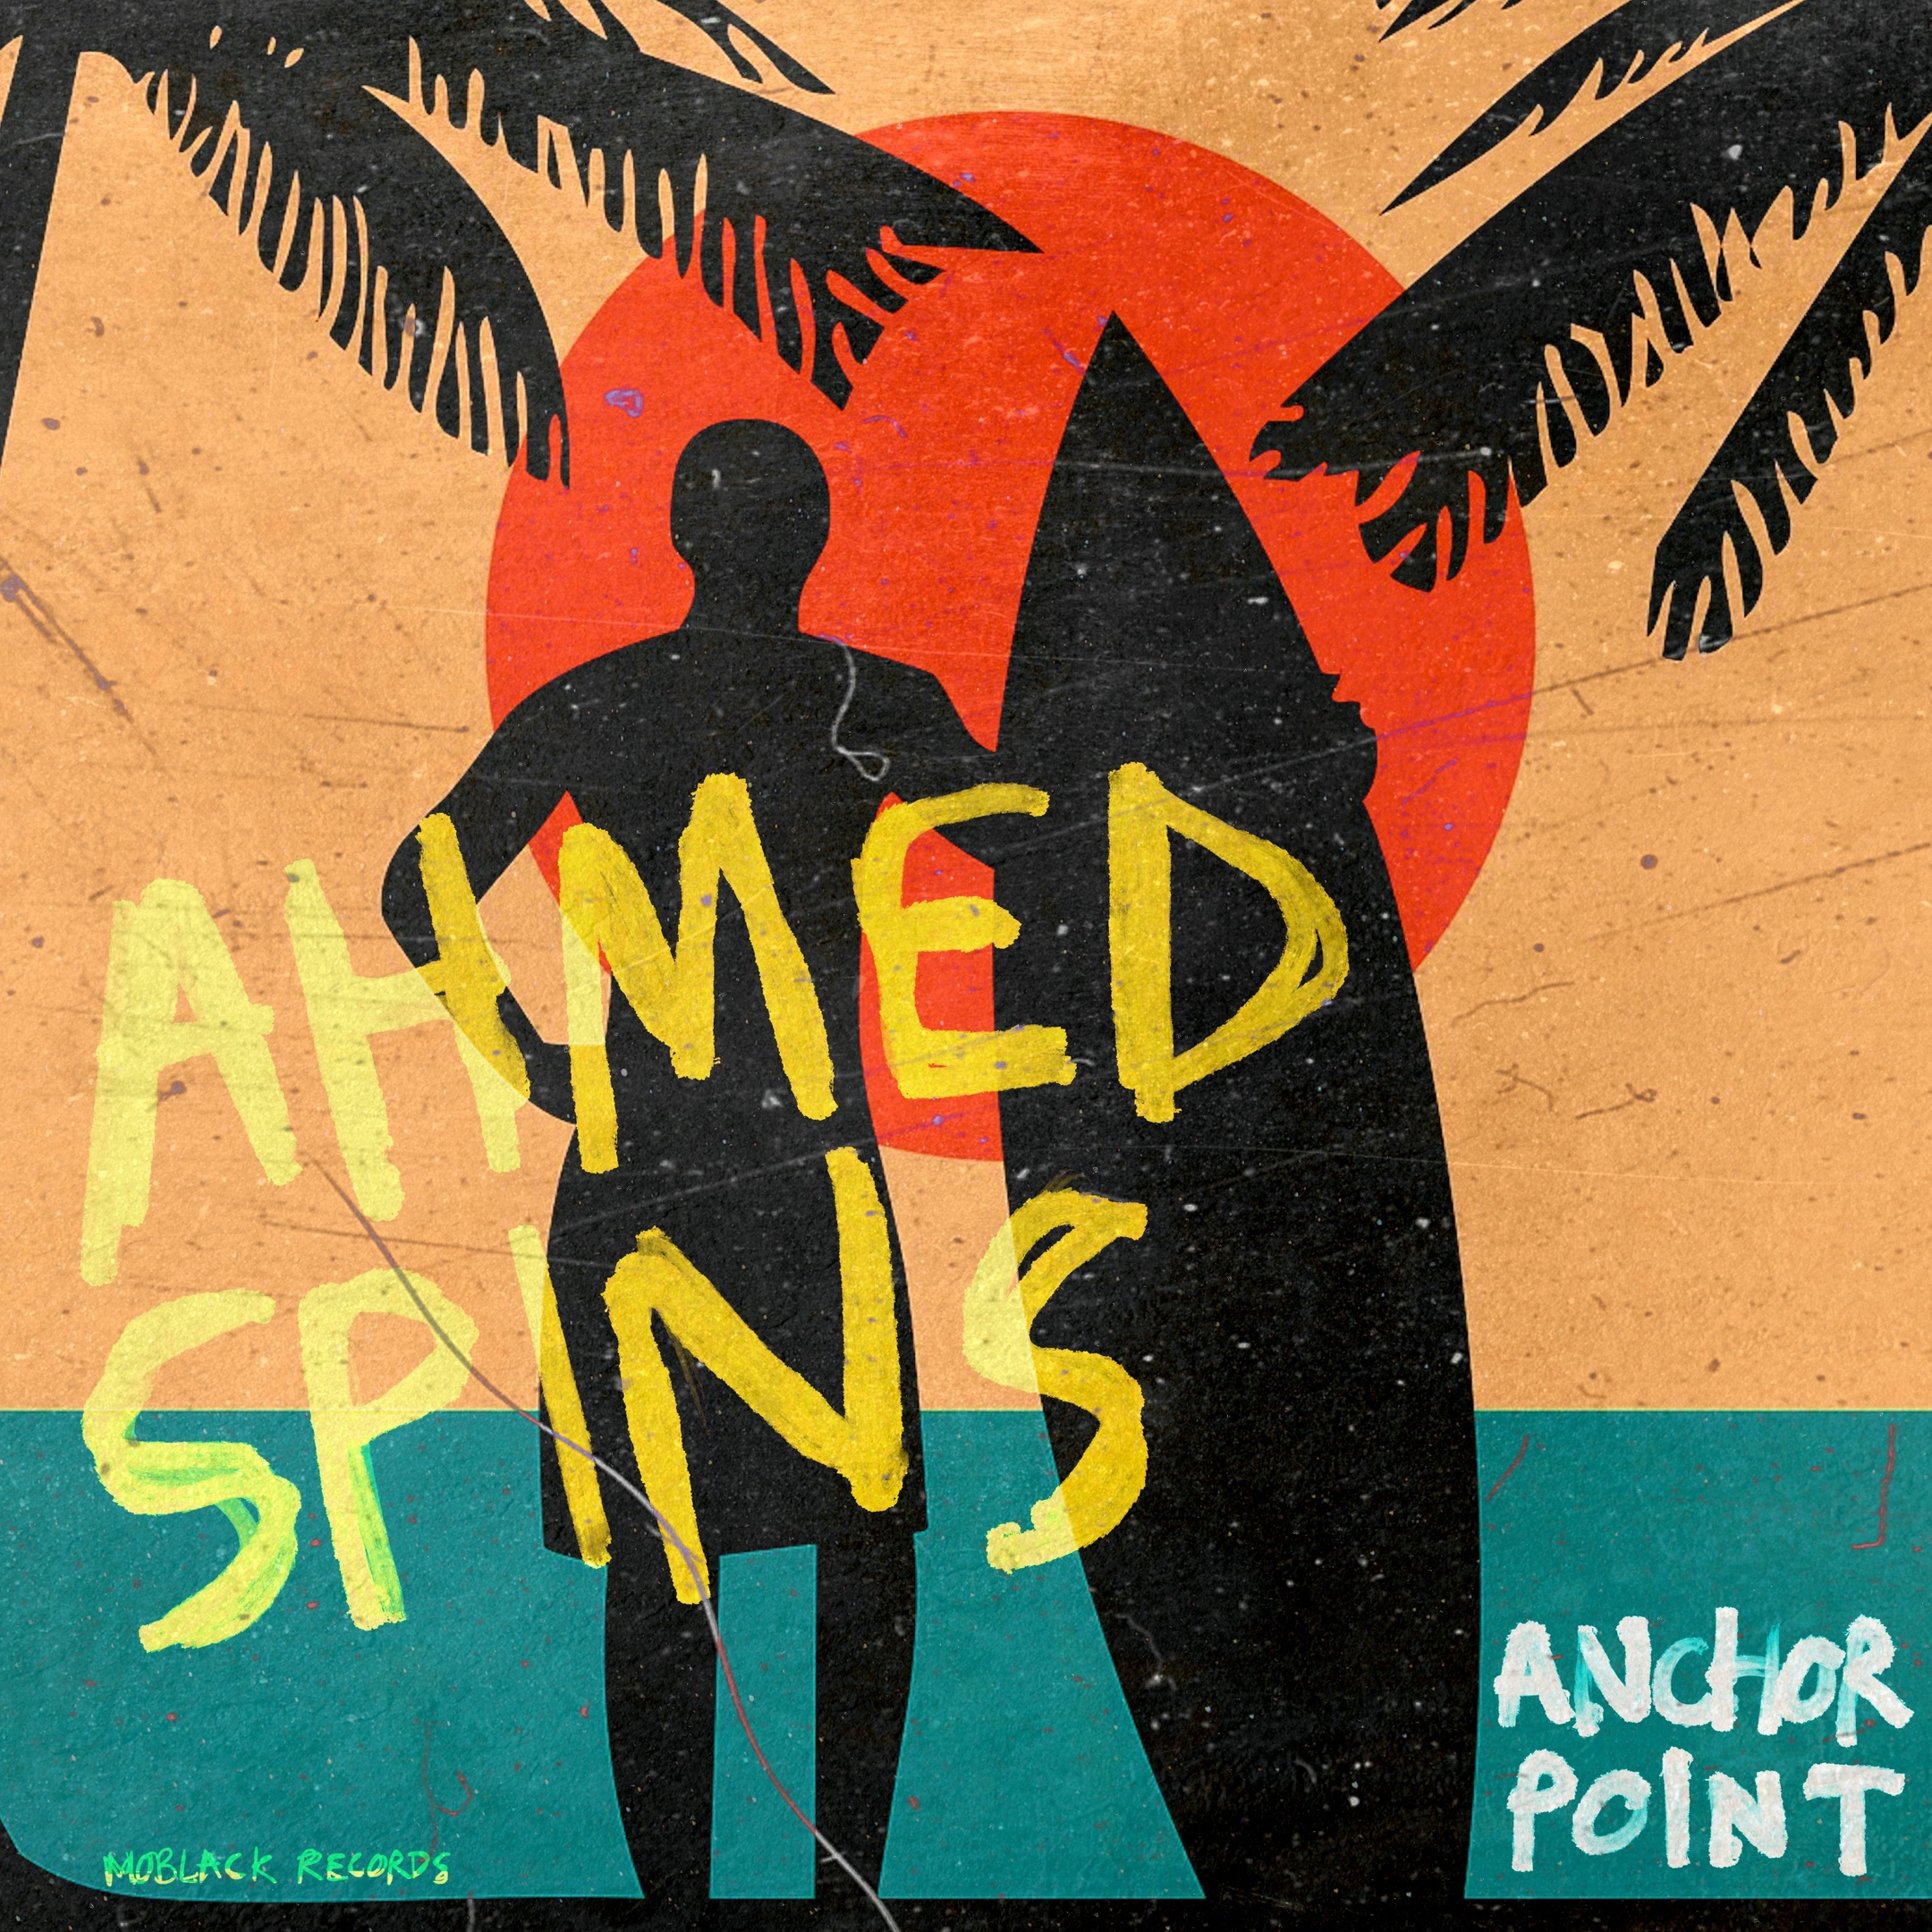 Spin feat. Ahmed Spins. Anchor point Ahmed Spins. Ahmed Spins feat Stevo Atambire Anchor. Waves & WAVS (feat. Lizwi) от Ahmed Spins.